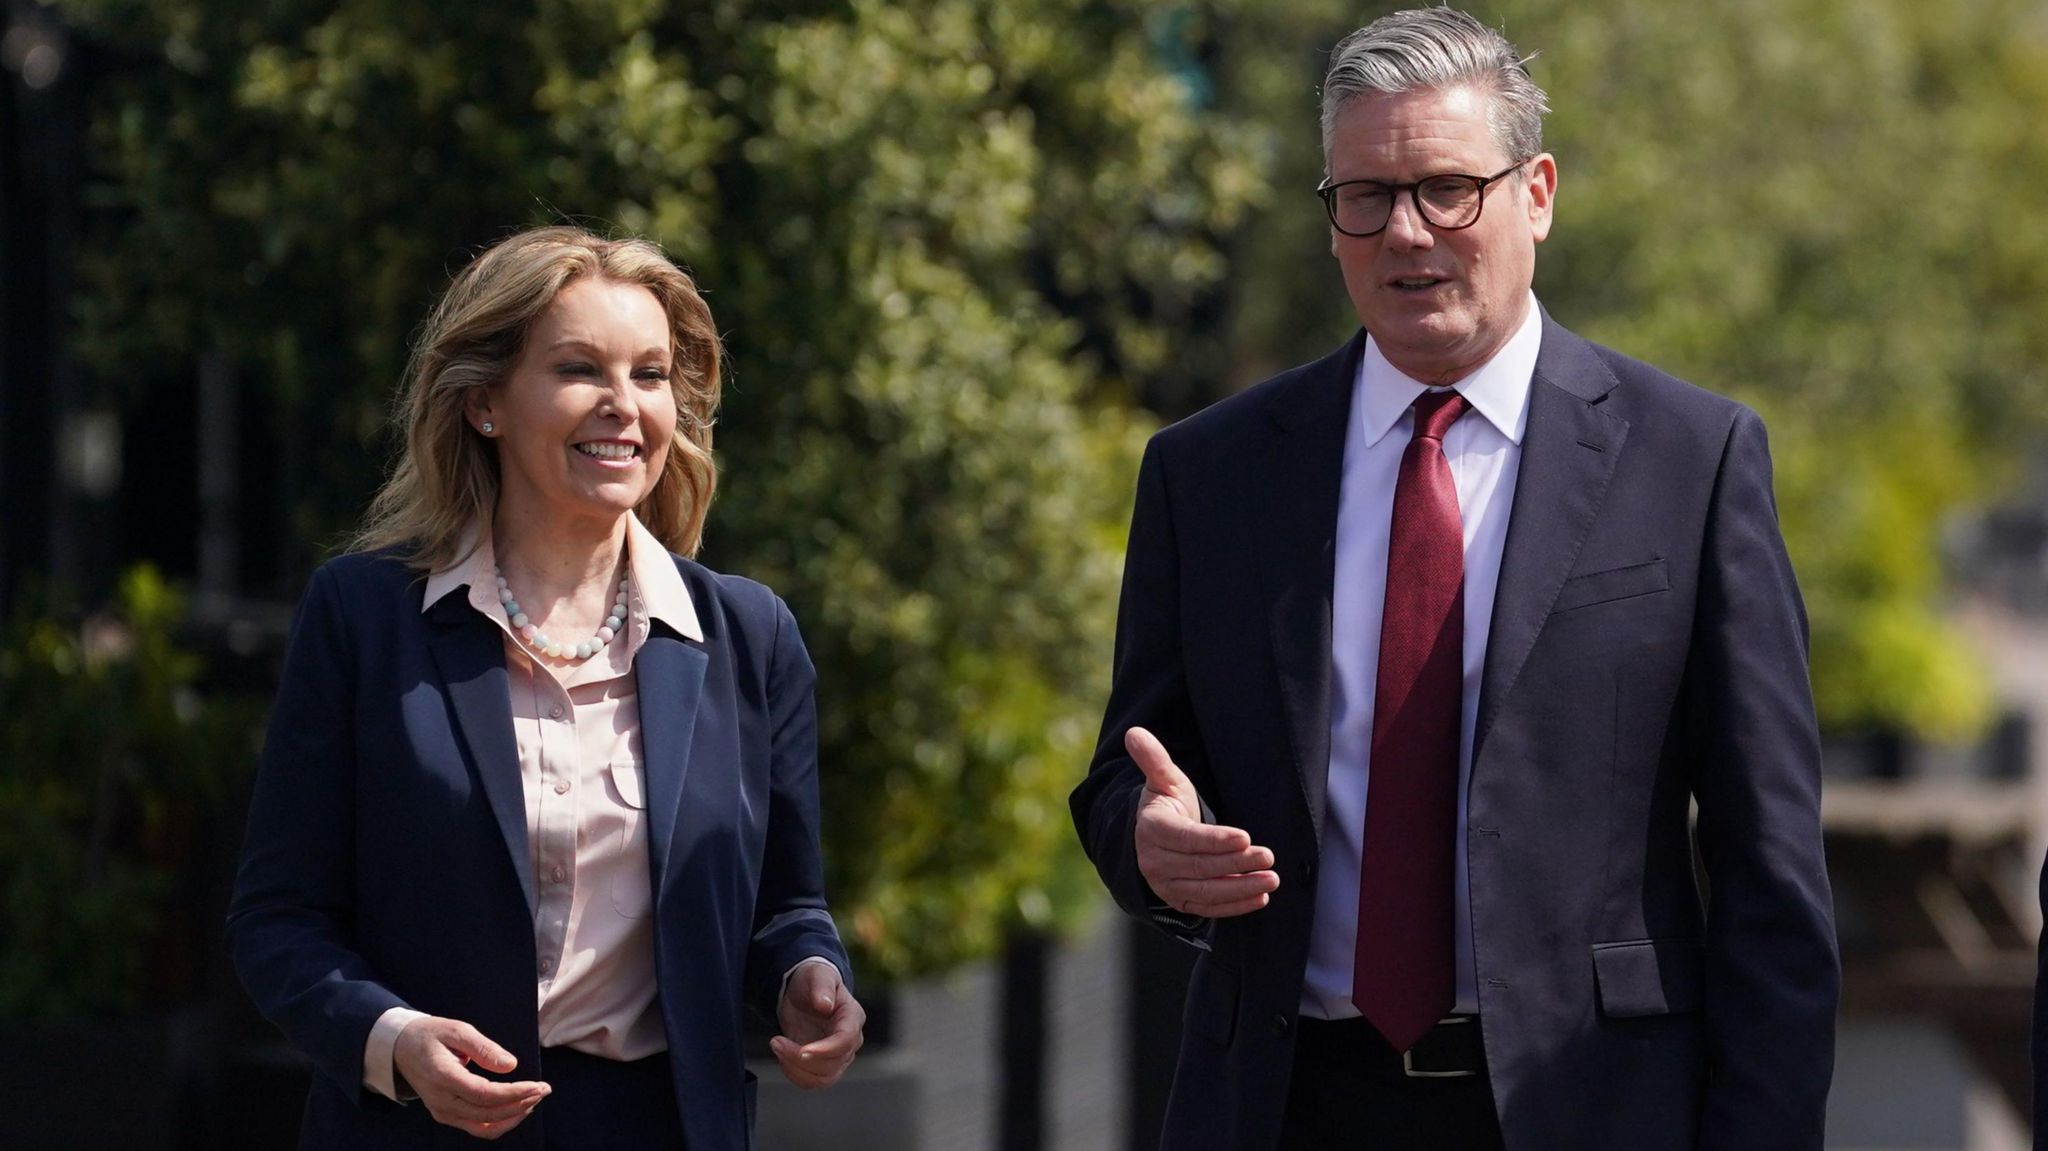 New Labour MP Natalie Elphicke walks with party leader Sir Keir Starmer